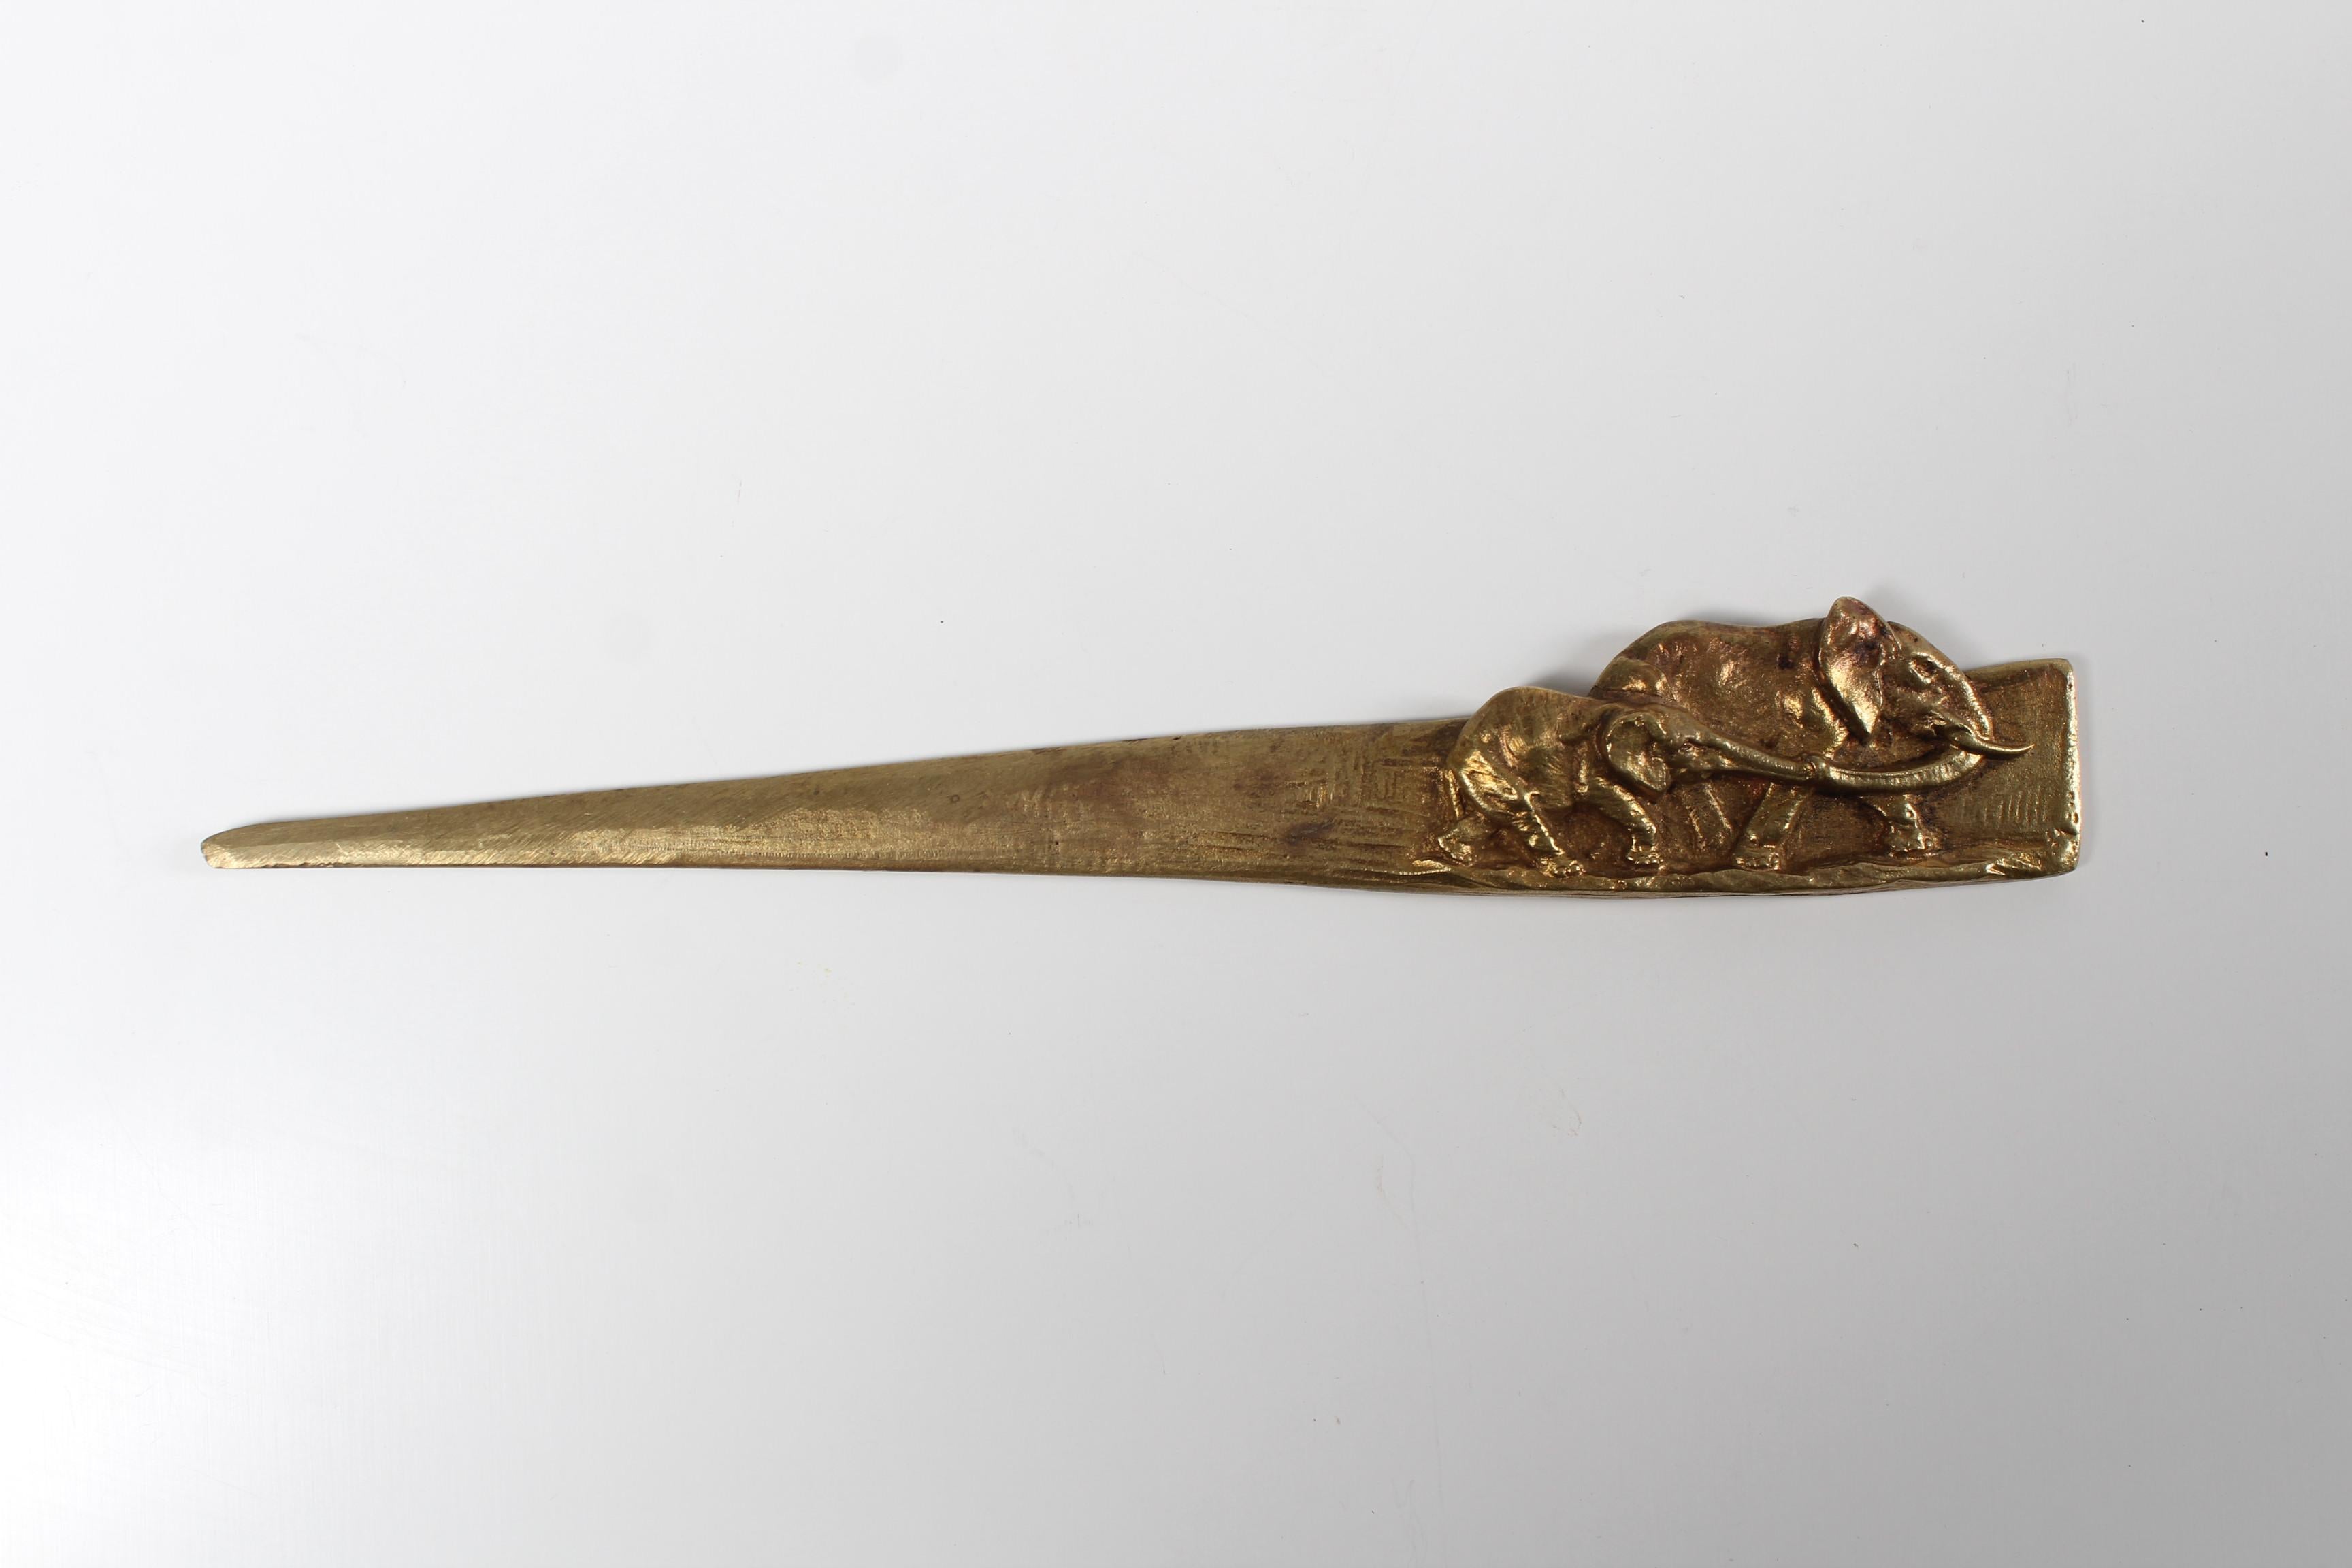 Antique Letter Opener with Elephants.

So beautiful, very nice condition!